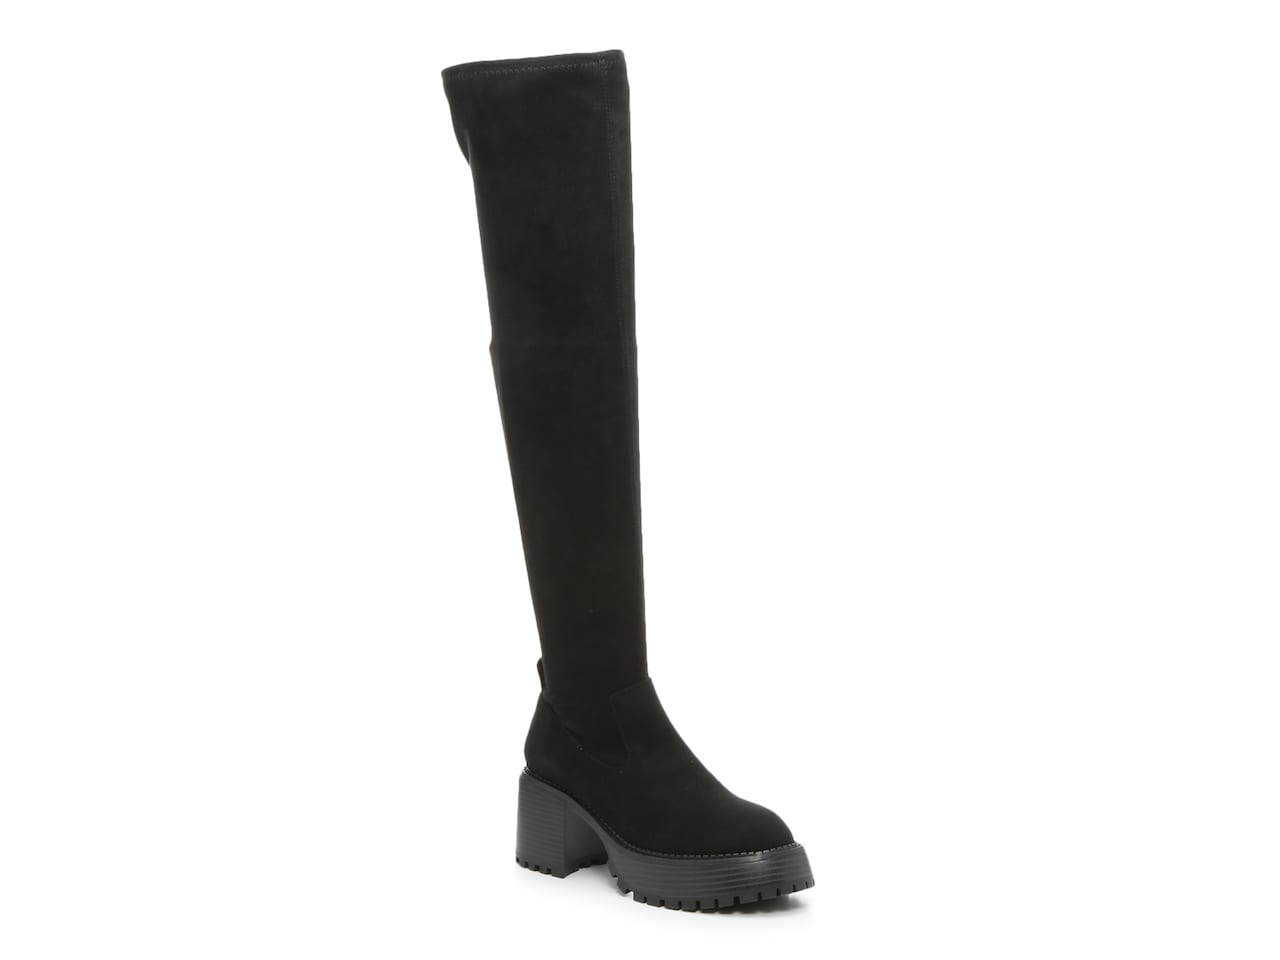 Mia Women's Daily Over-The-Knee Boots (Black) $28 + Free Shipping